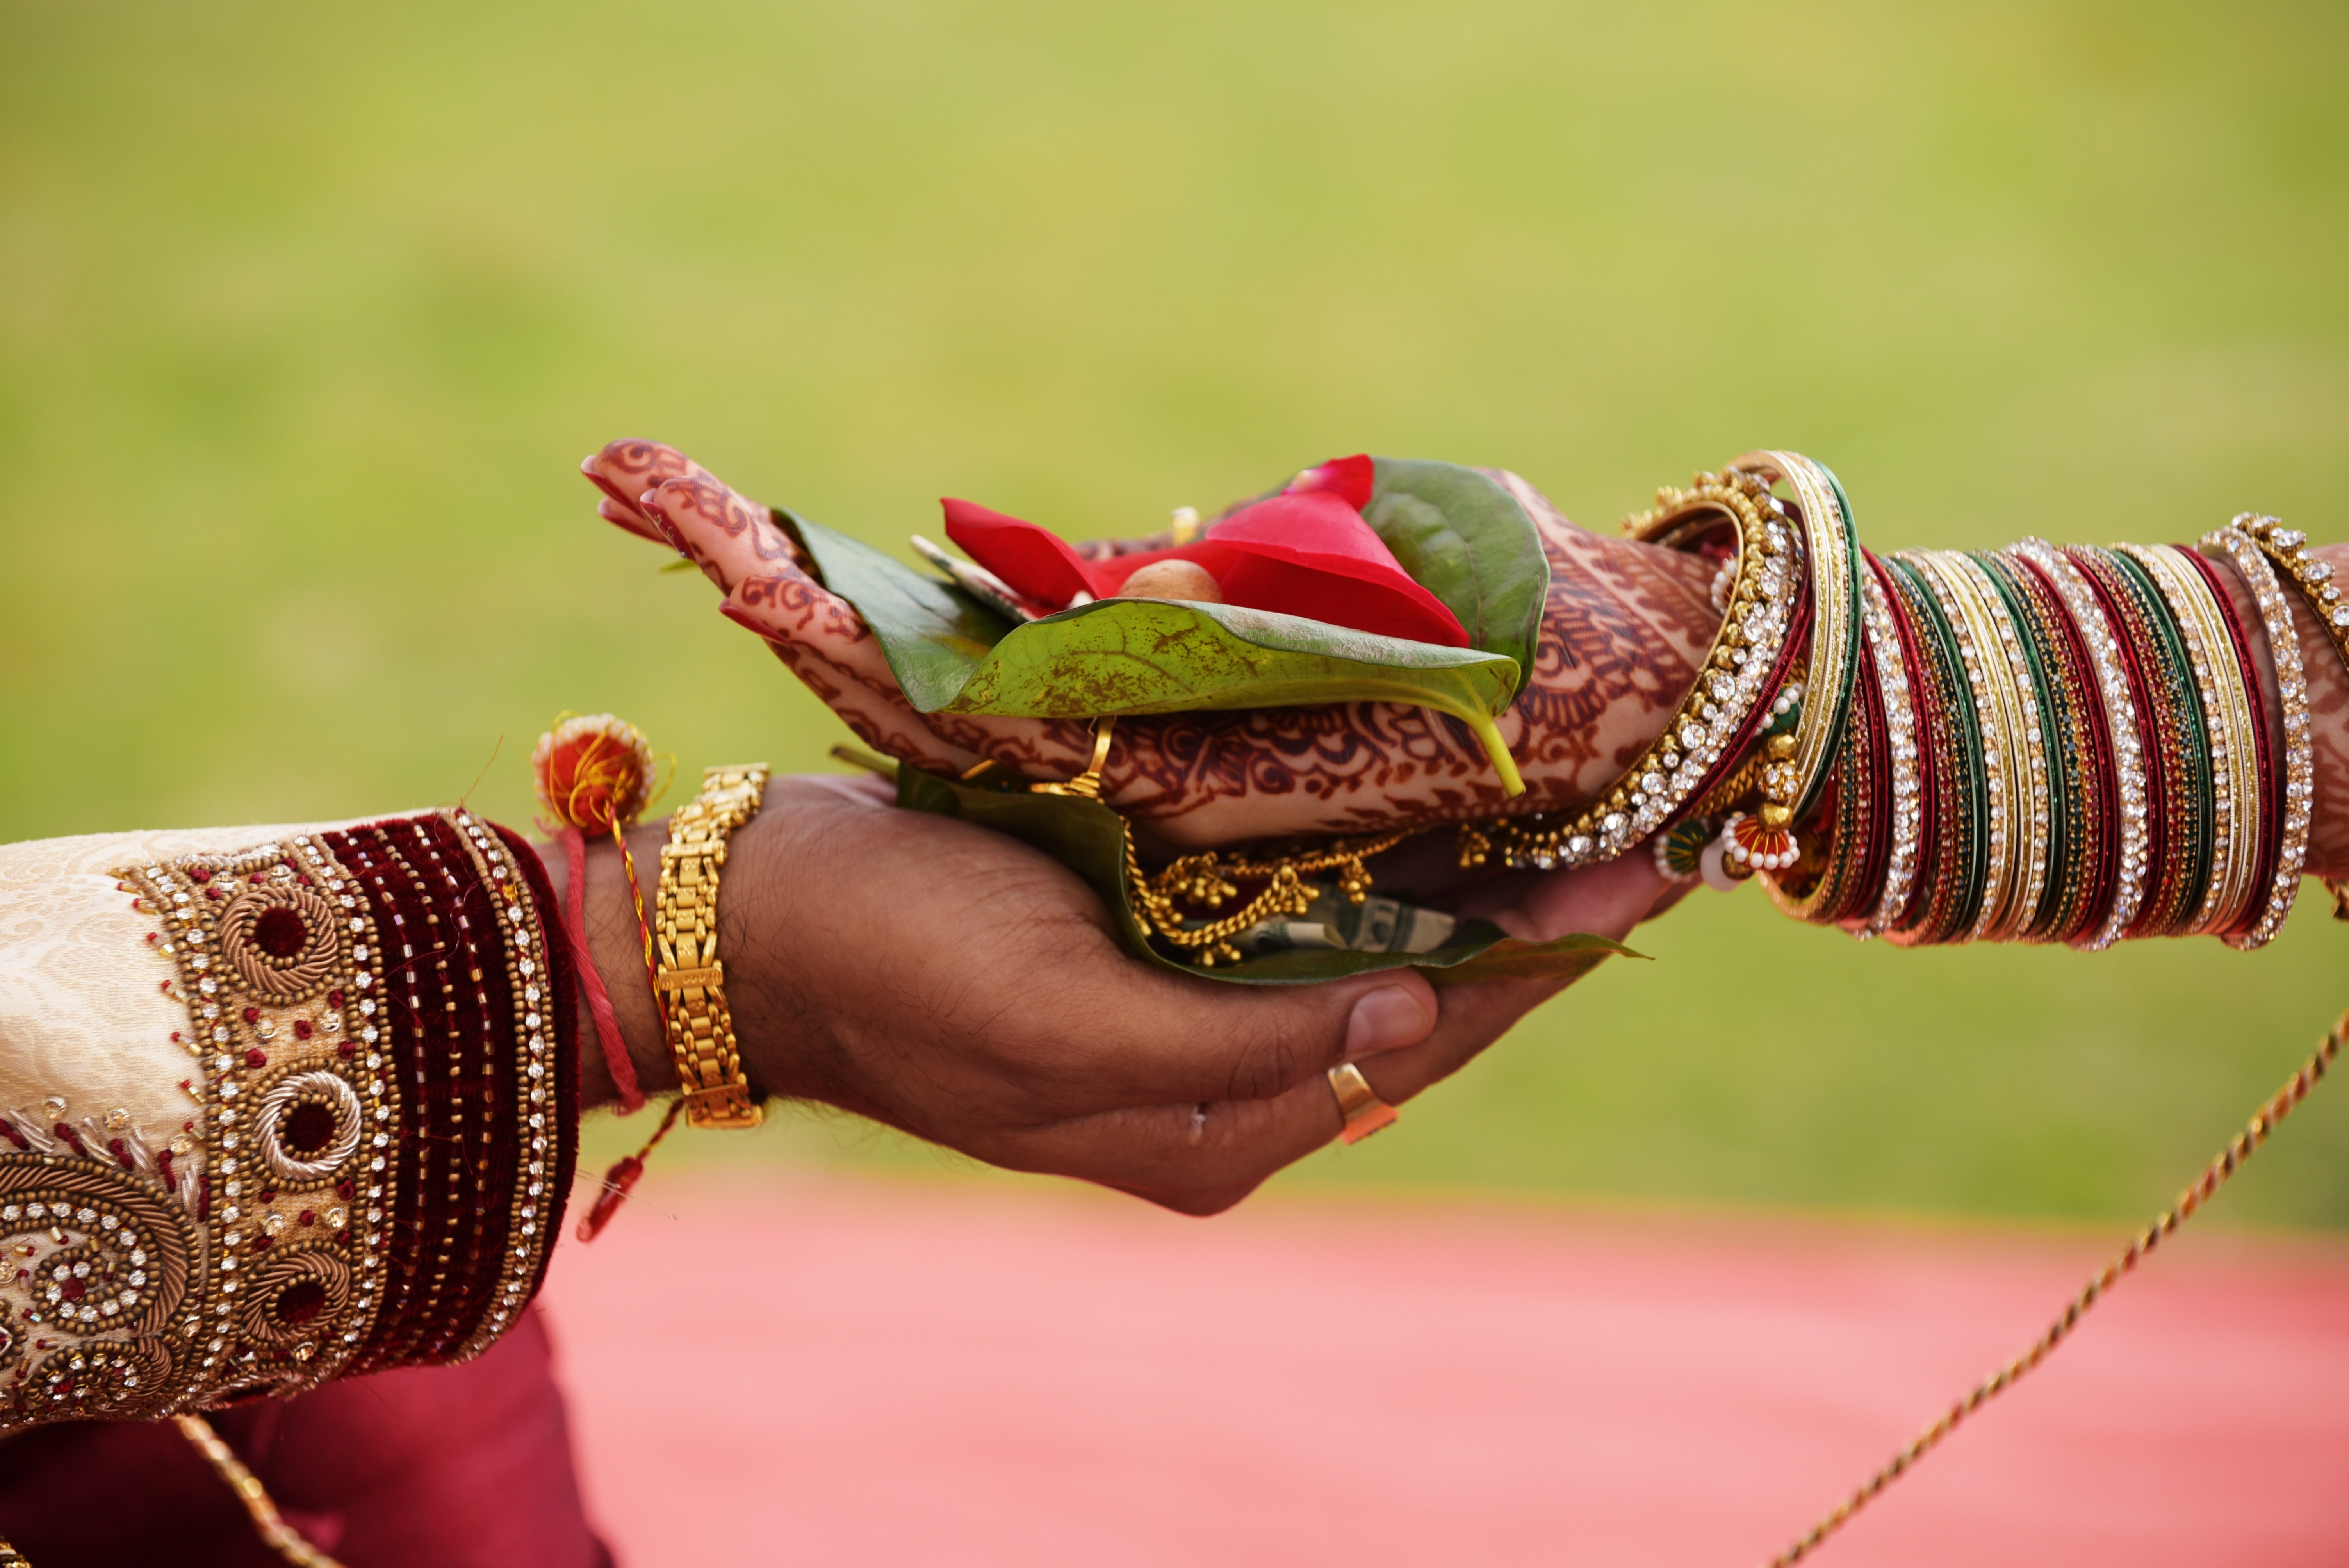 Why do Indians wear bangles on their hands? - Quora